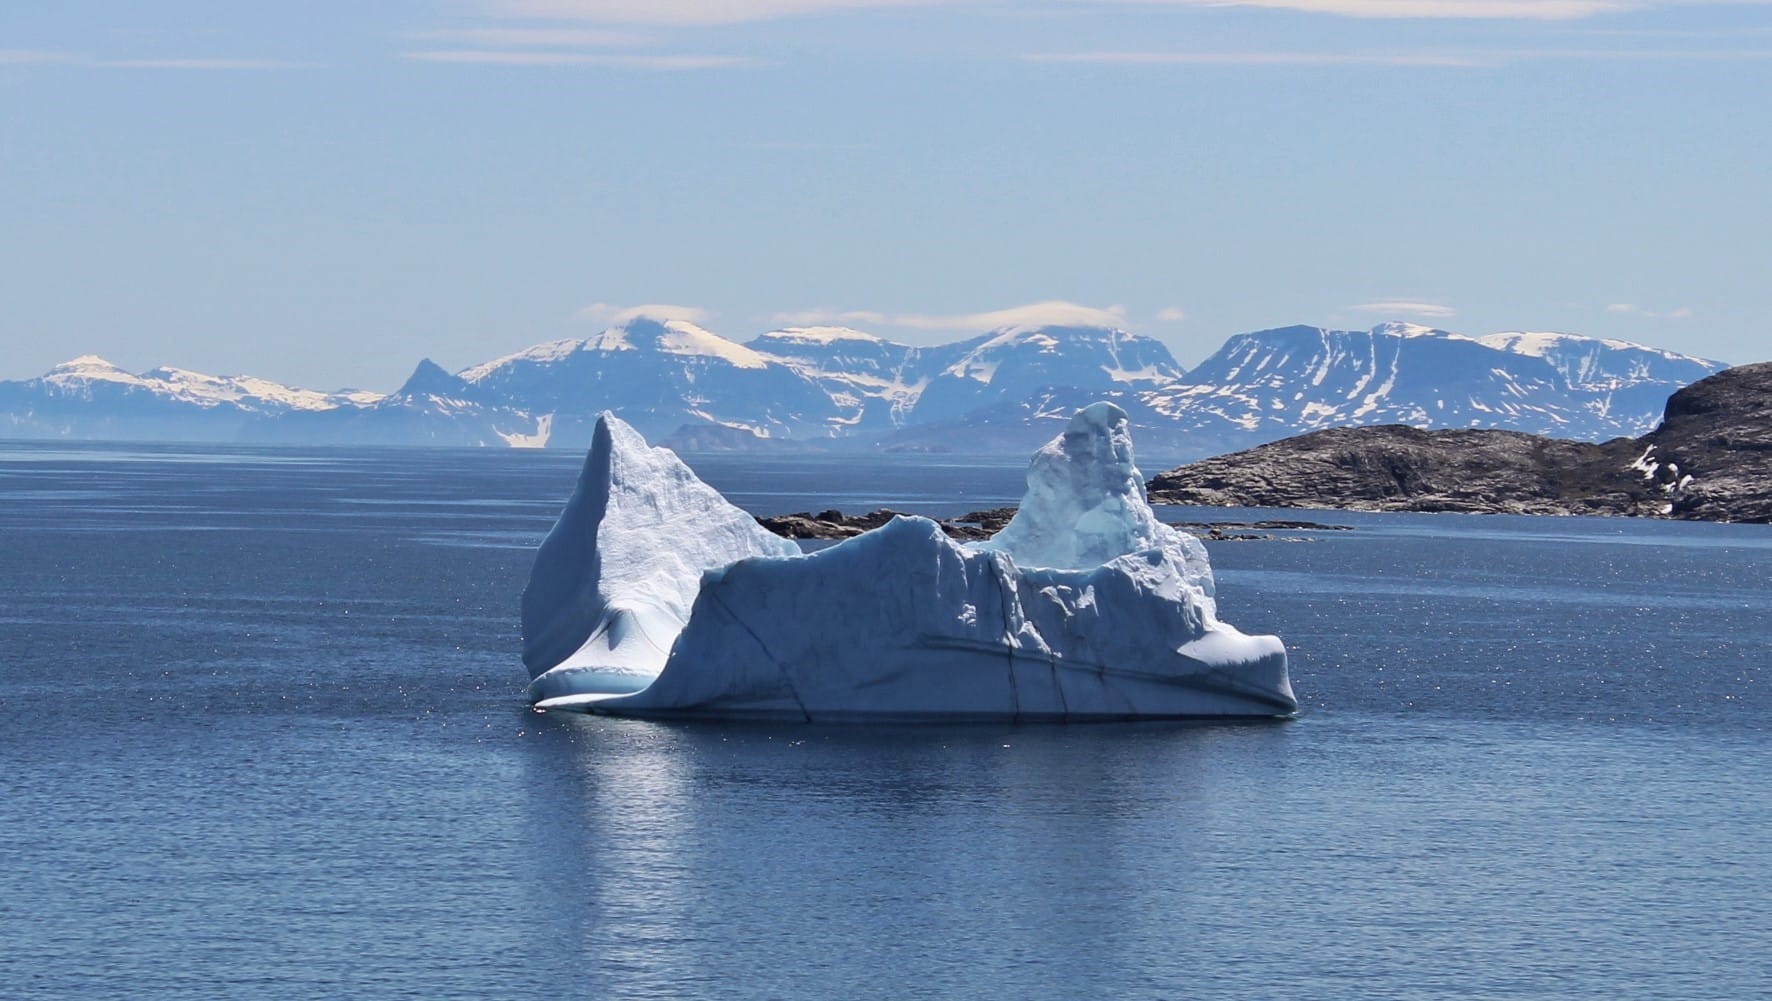 Day Trip - Crater, Fjord and Iceberg of Labrador